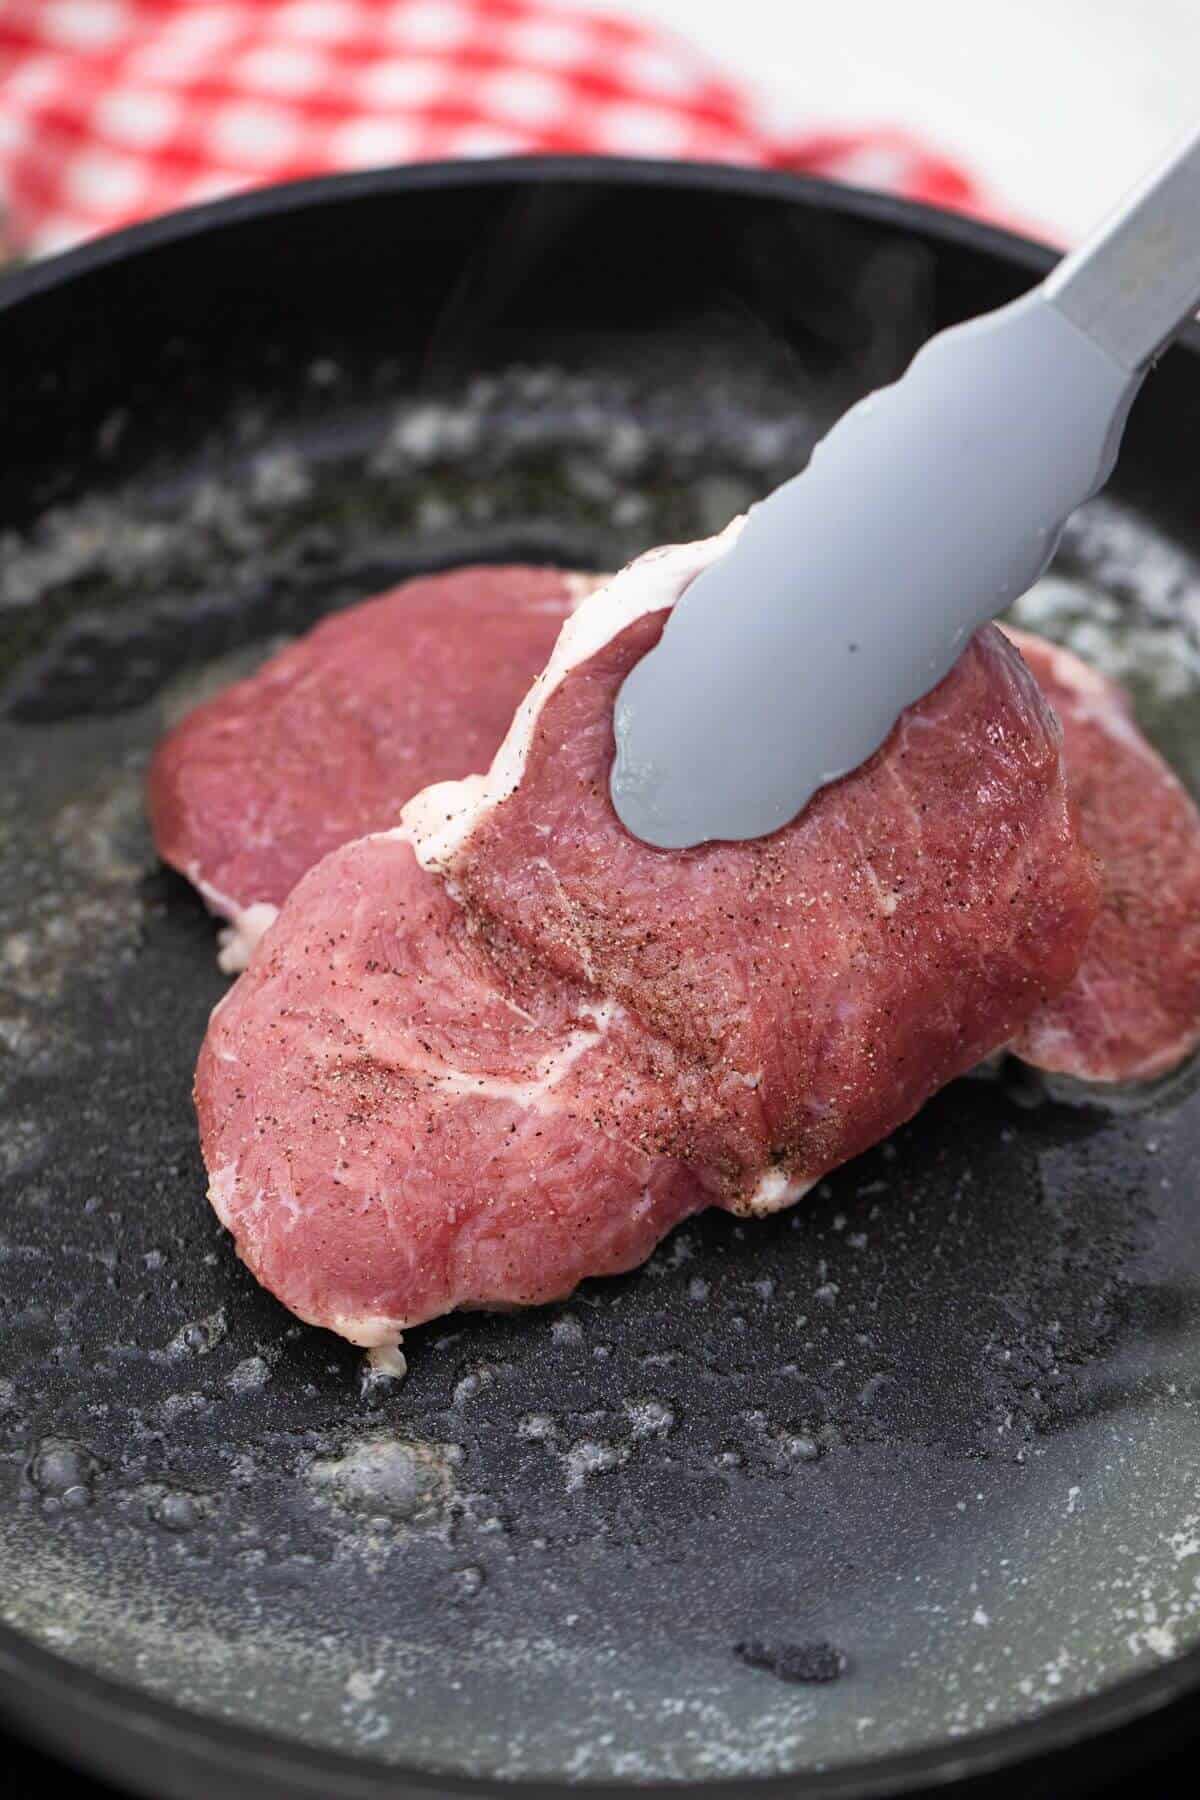 A piece of meat is being cooked in a frying pan.